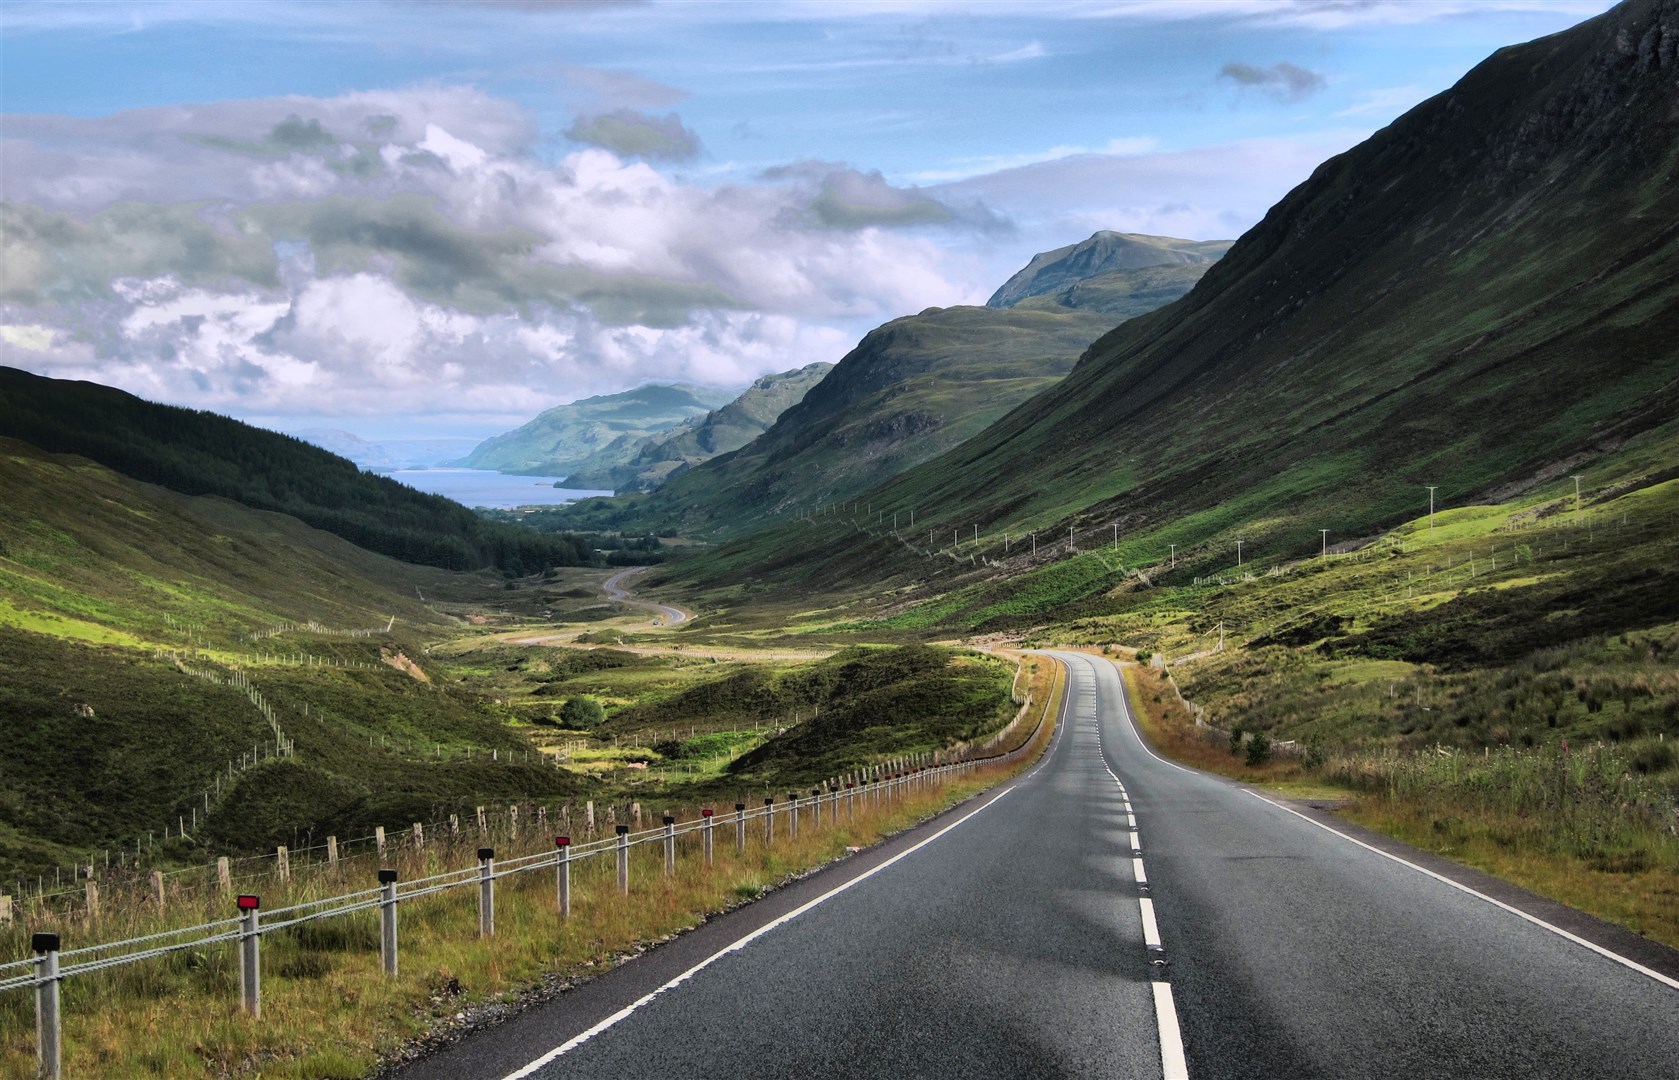 The landscape accessible via the North Coast 500 has proved a big hit with visitors. The route carves a large swathe through much of Ross-shire. Picture: Steve Carter